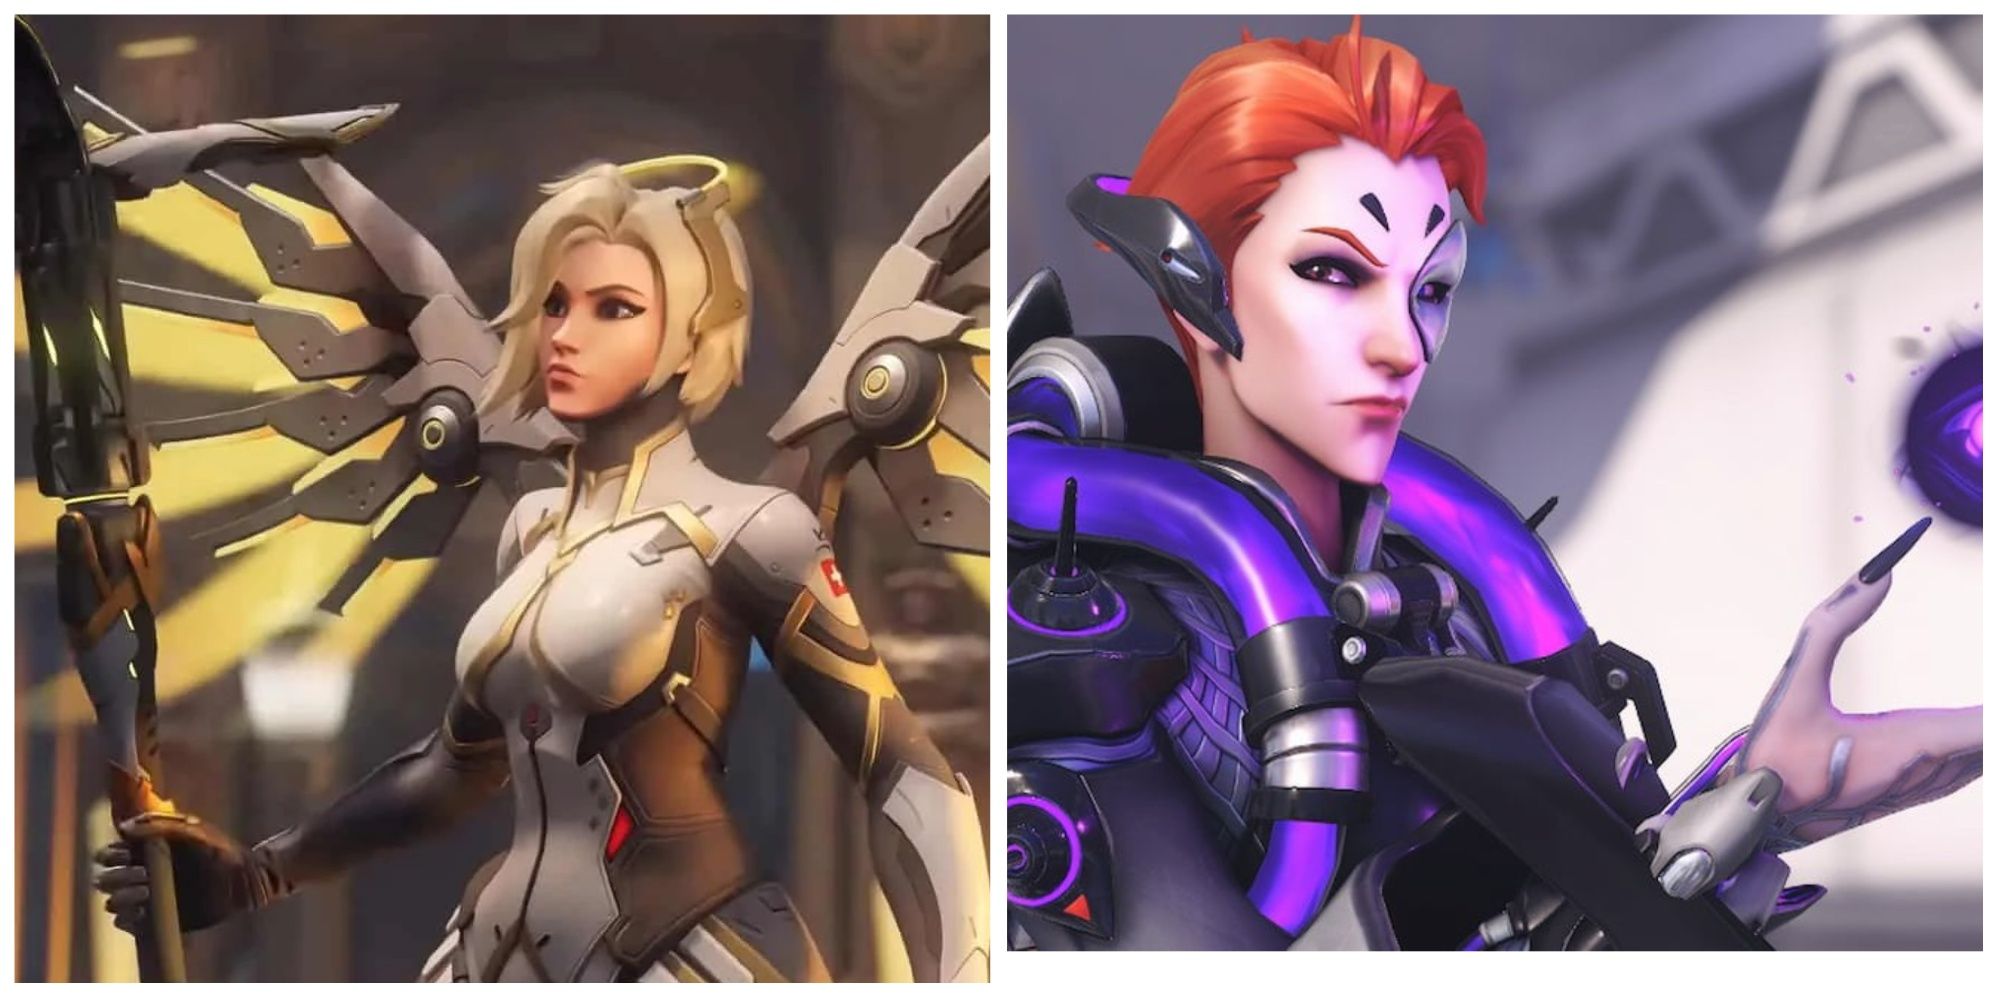 Overwatch 2 screenshot of characters Mercy (left) and Moira (right)